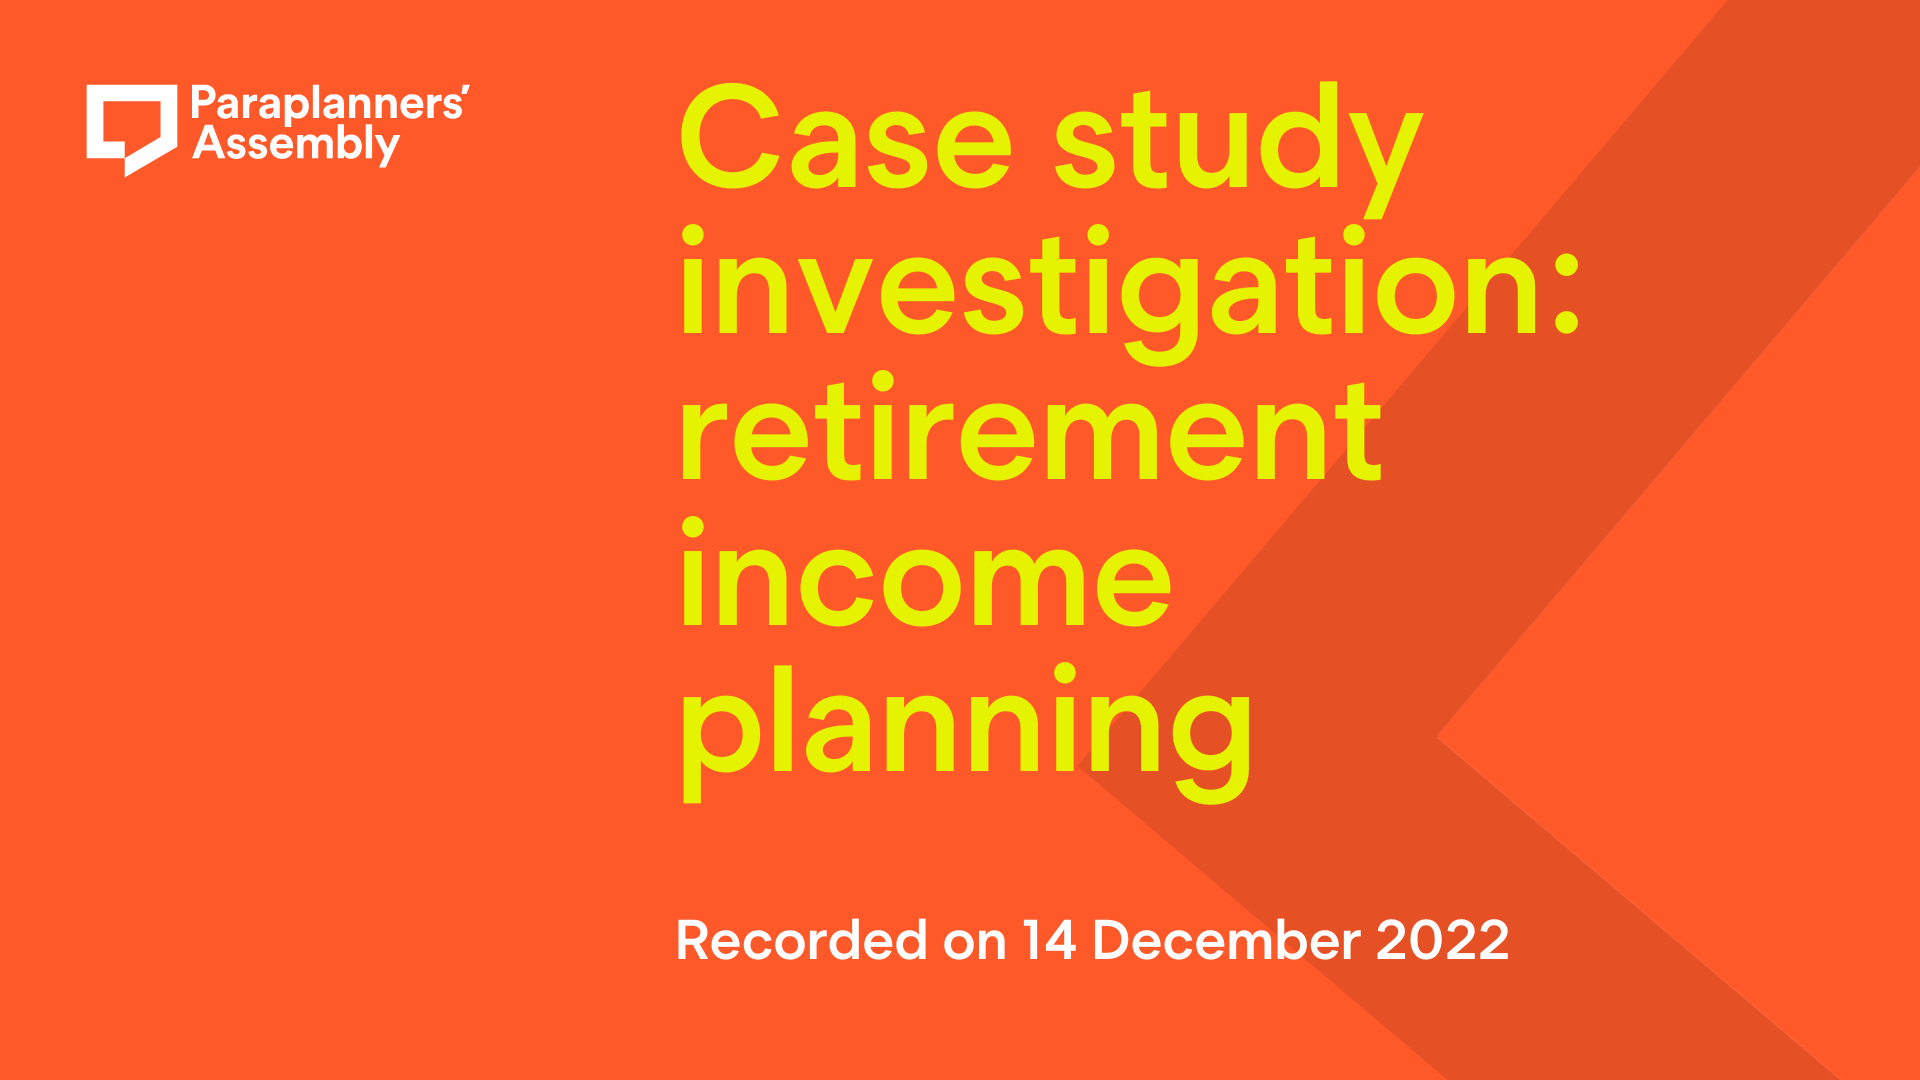 Case study investigation: retirement income planning. Recorded on 14 December 2022.